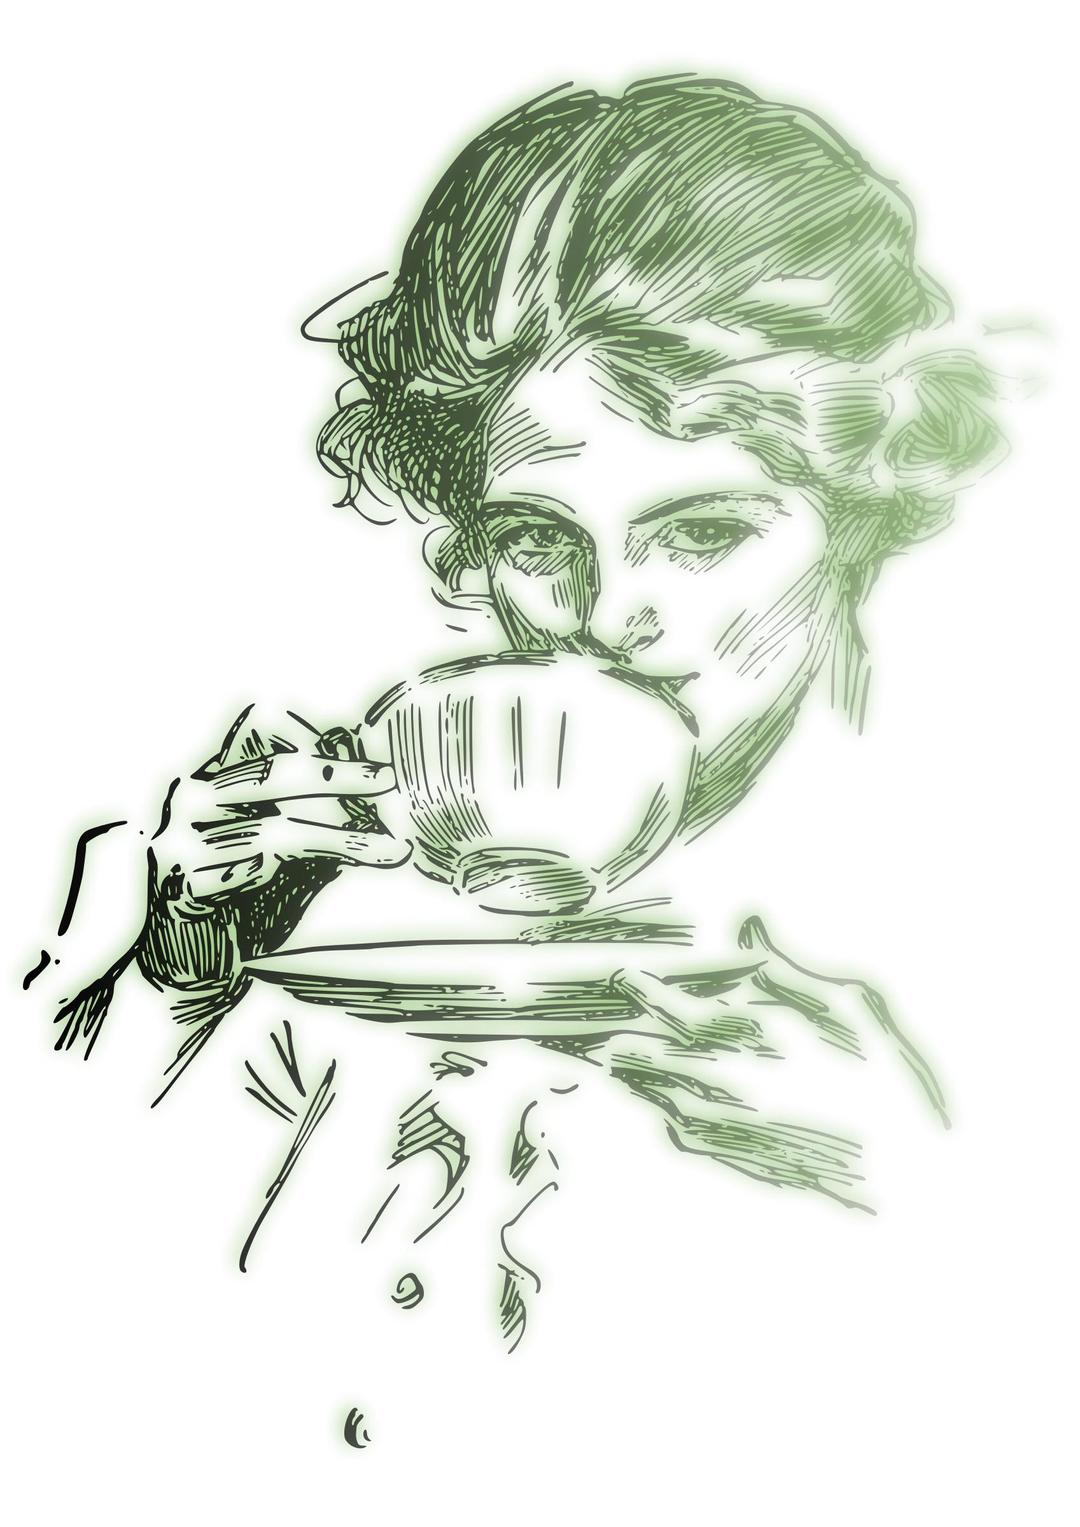 Woman drinking coffee or tea 02 - Blur  png transparent